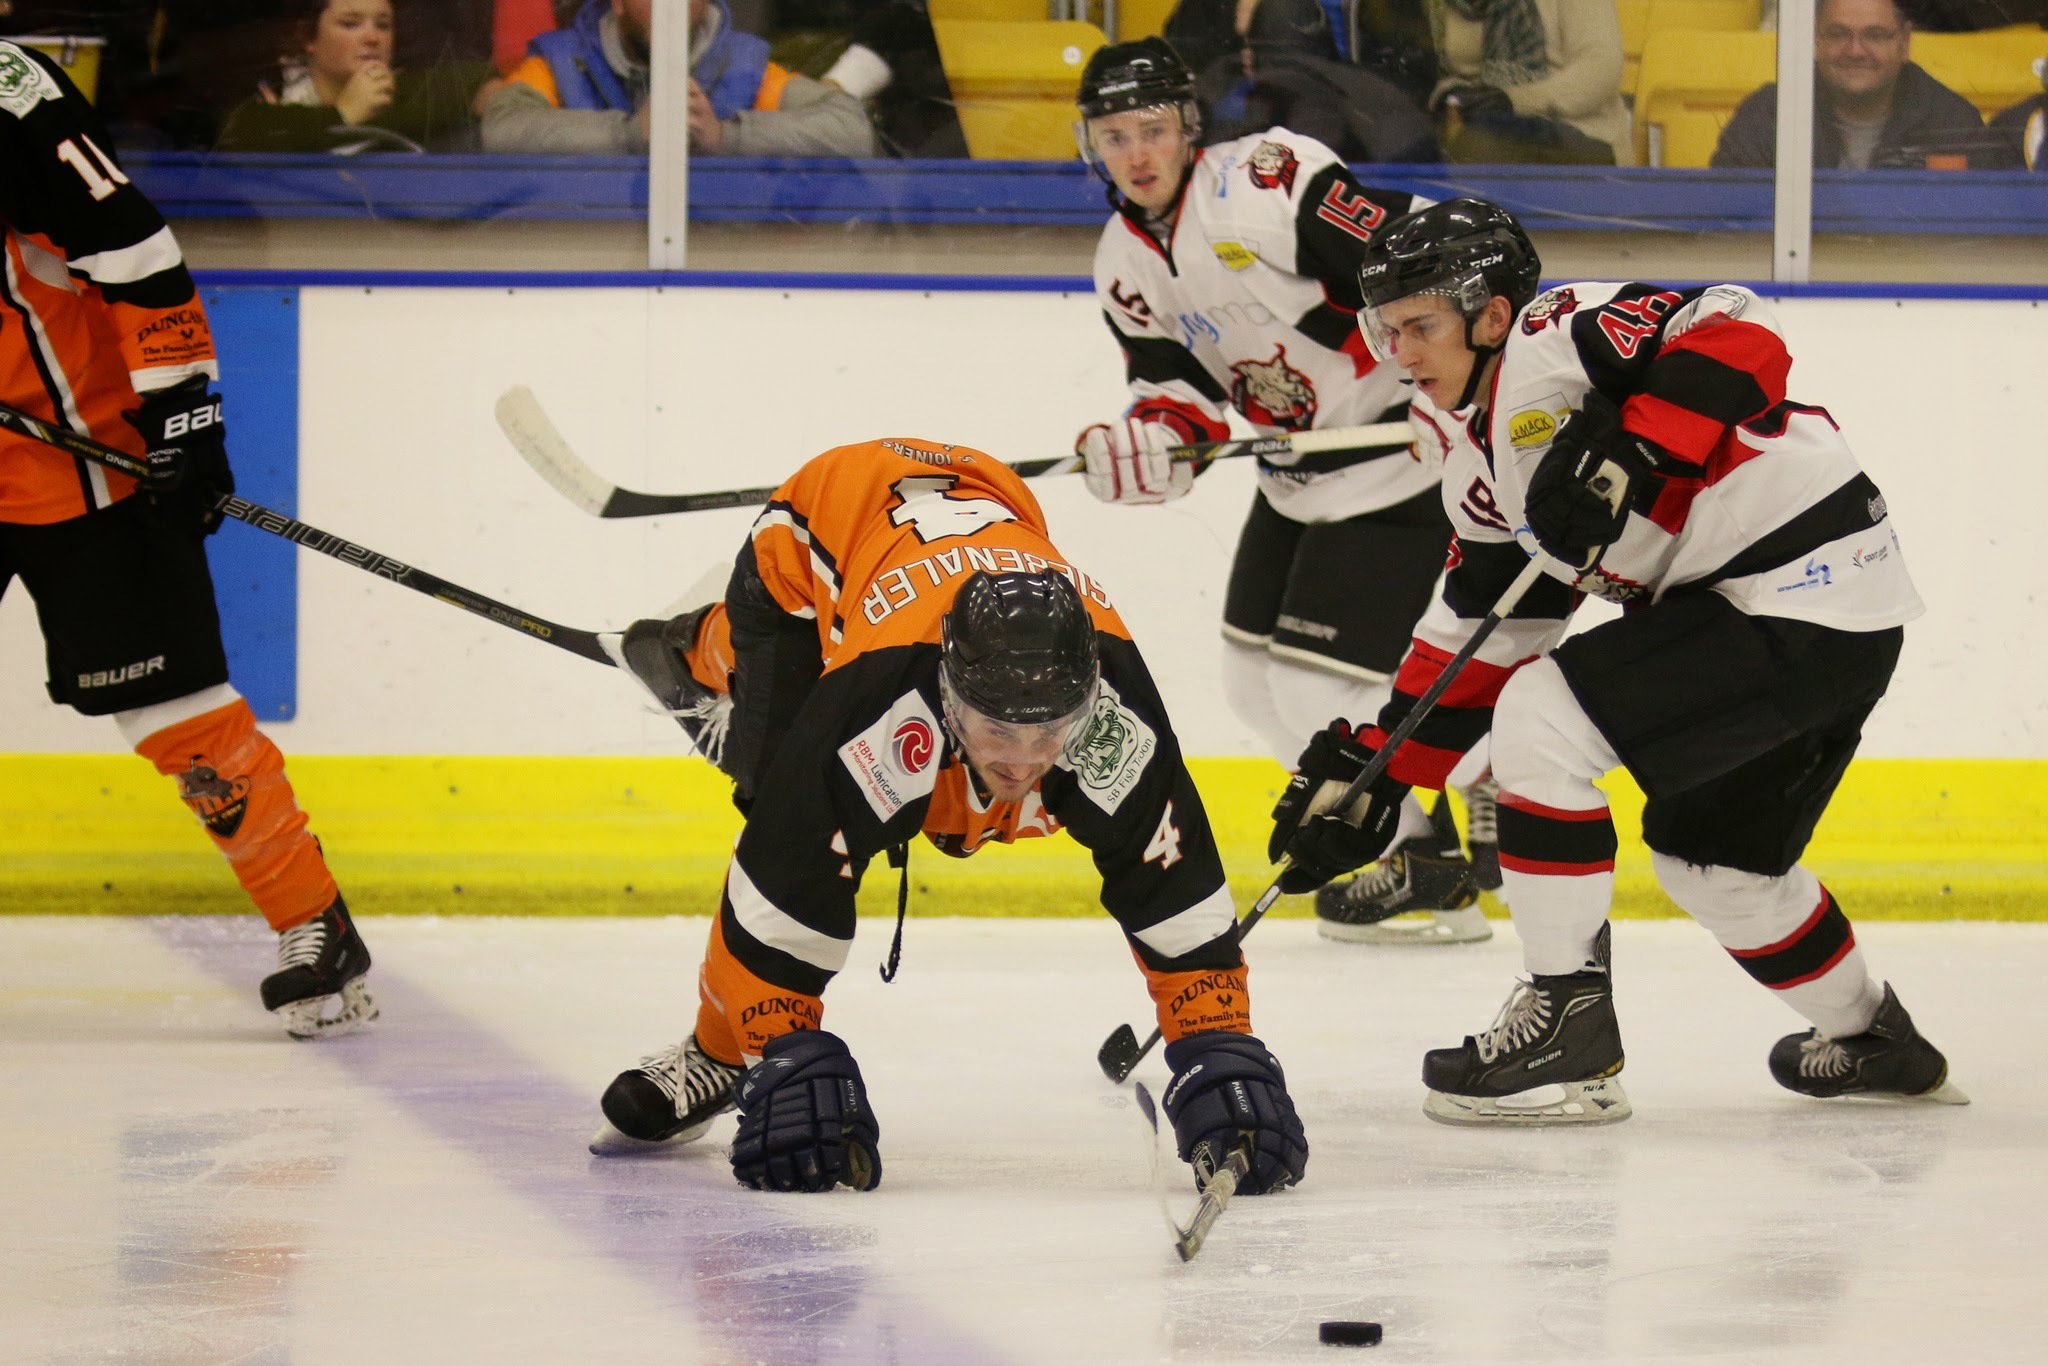 Aberdeen Lynx saw off North Ayrshire Wild 8-1 to set up a semi-final with Dundee Tigers